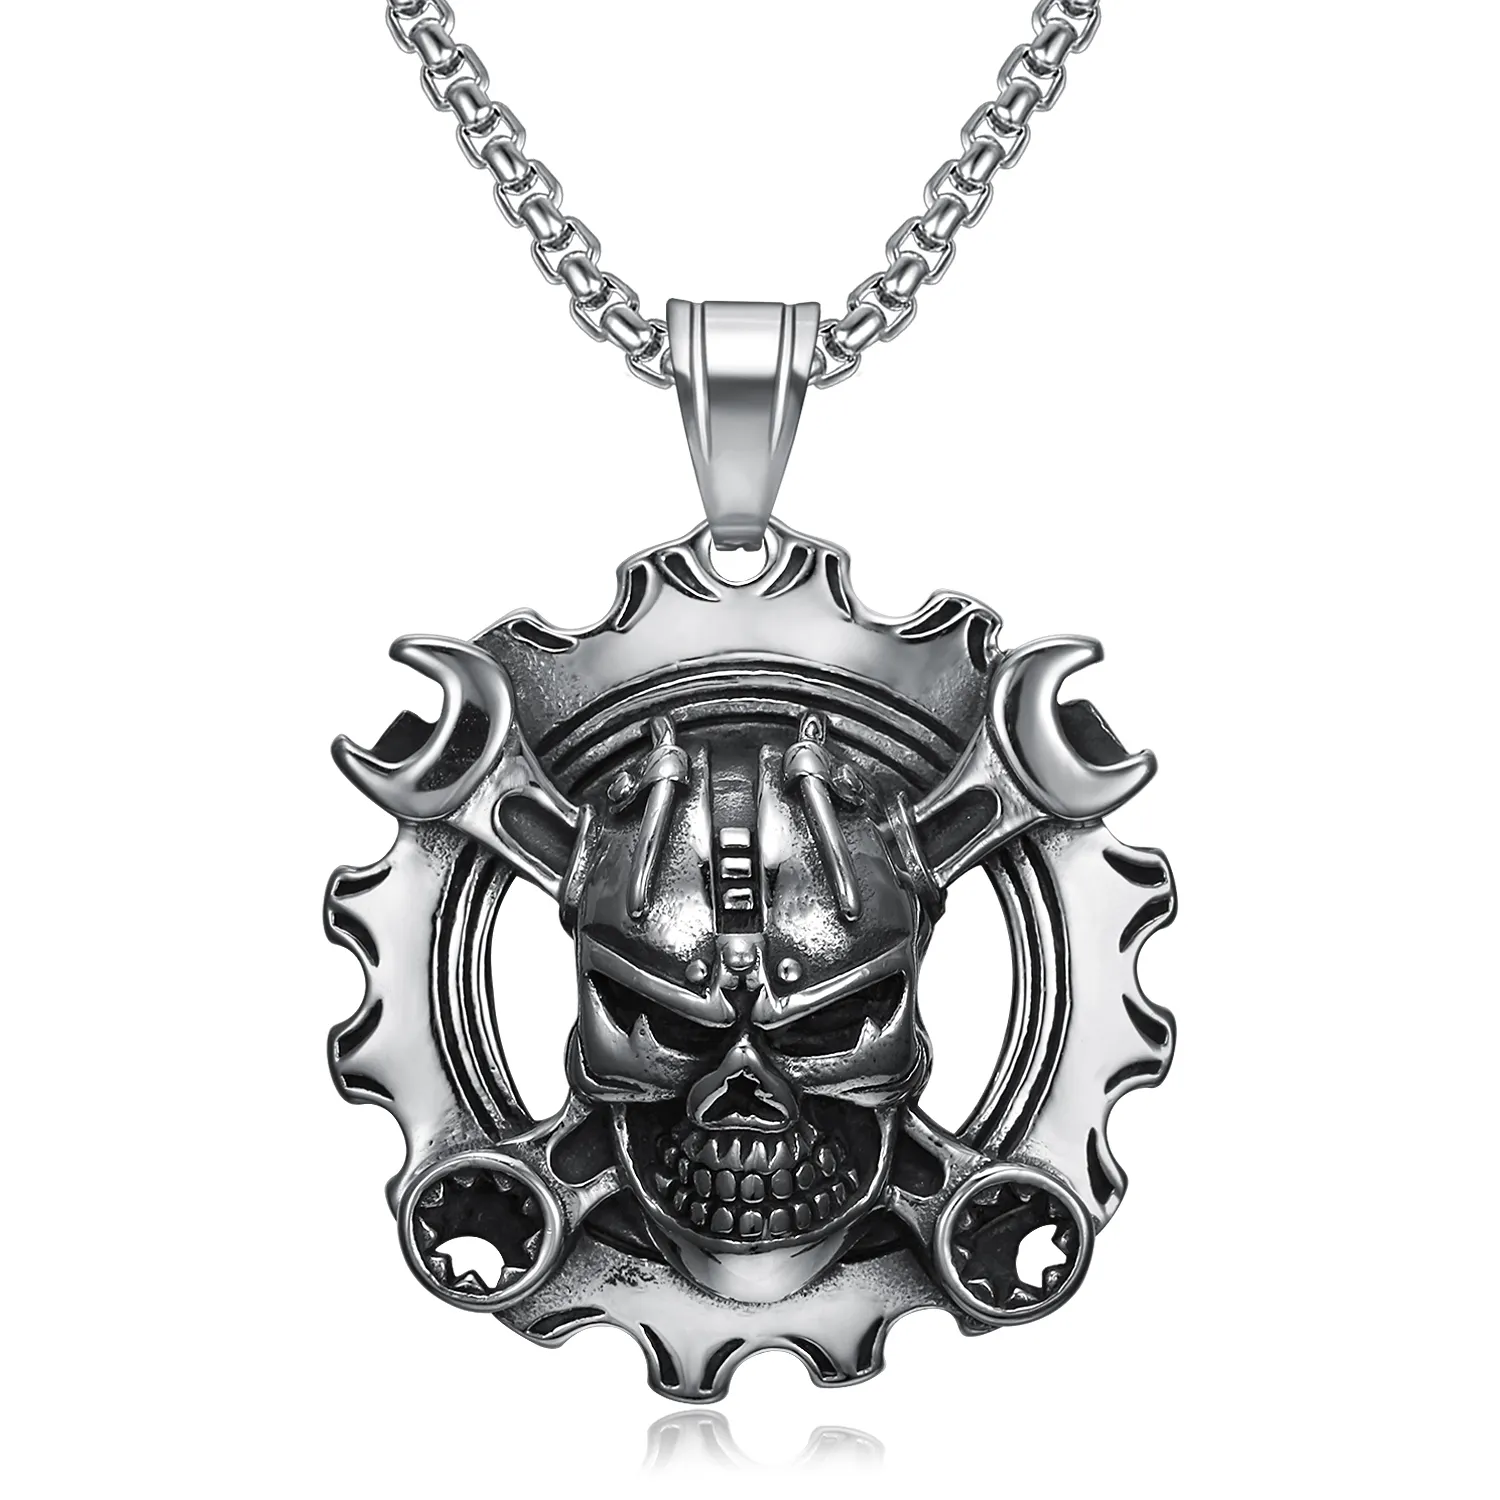 Men's Fashion Punk Rock Casting Pendant Hip Hop Trendy 316 Stainless Steel Glamour Heavy Metal Skull Wrench Men Necklace